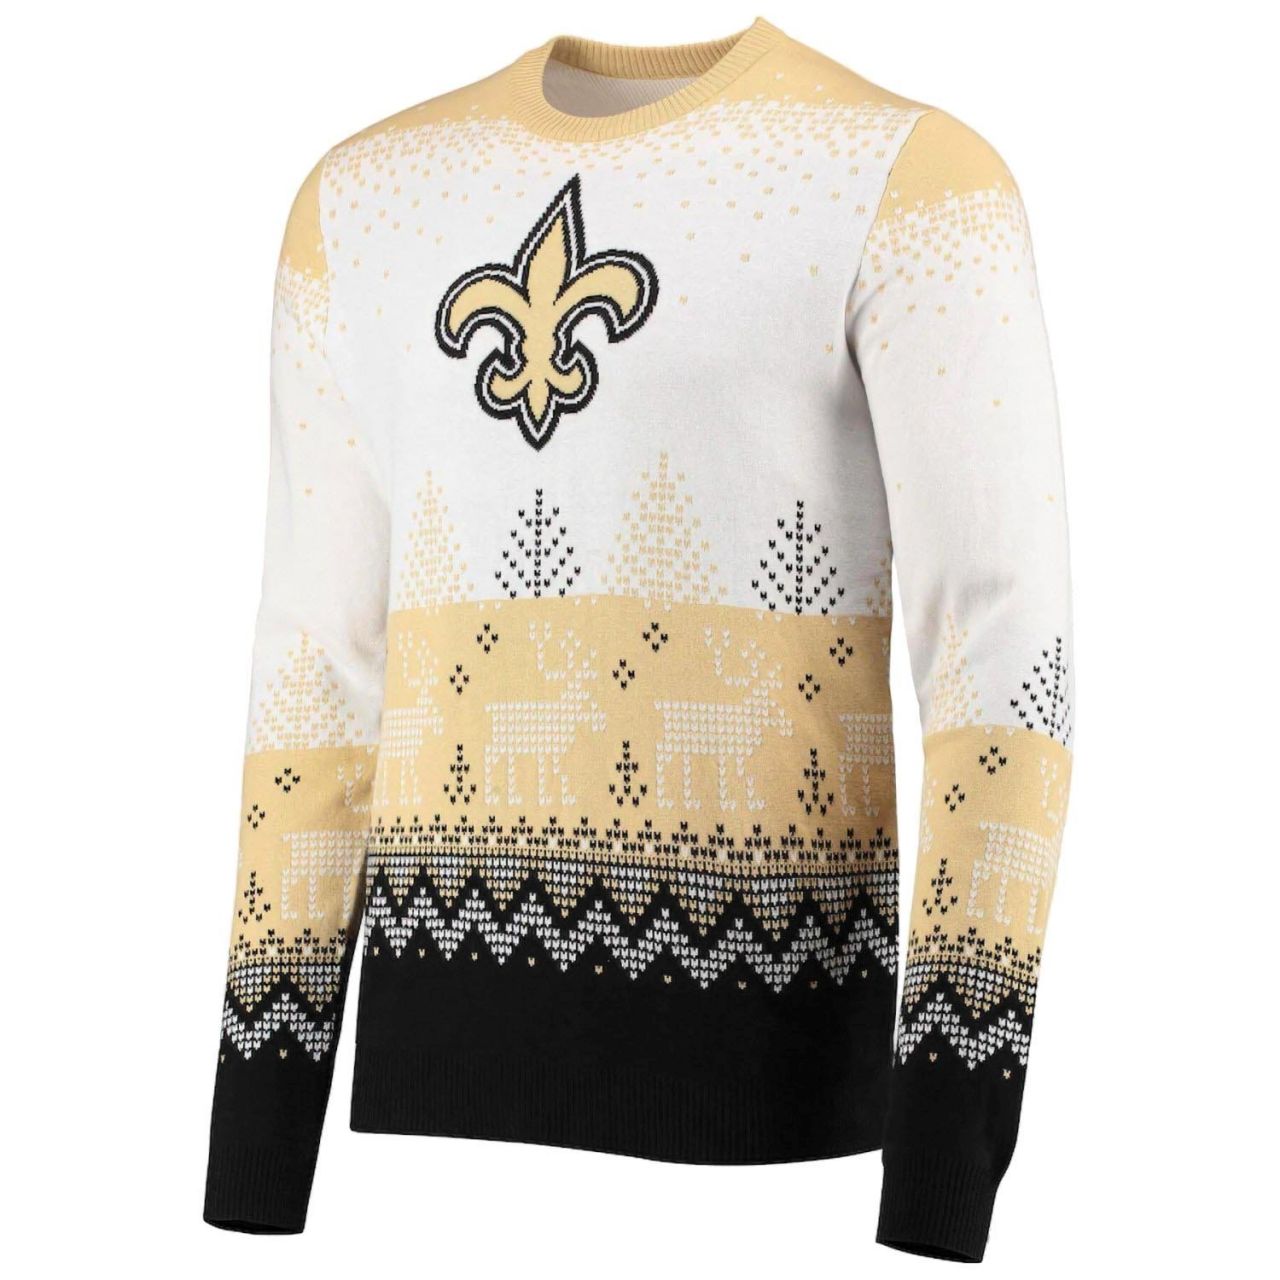 NFL Ugly Sweater XMAS Strick Pullover New Orleans Saints von FOCO